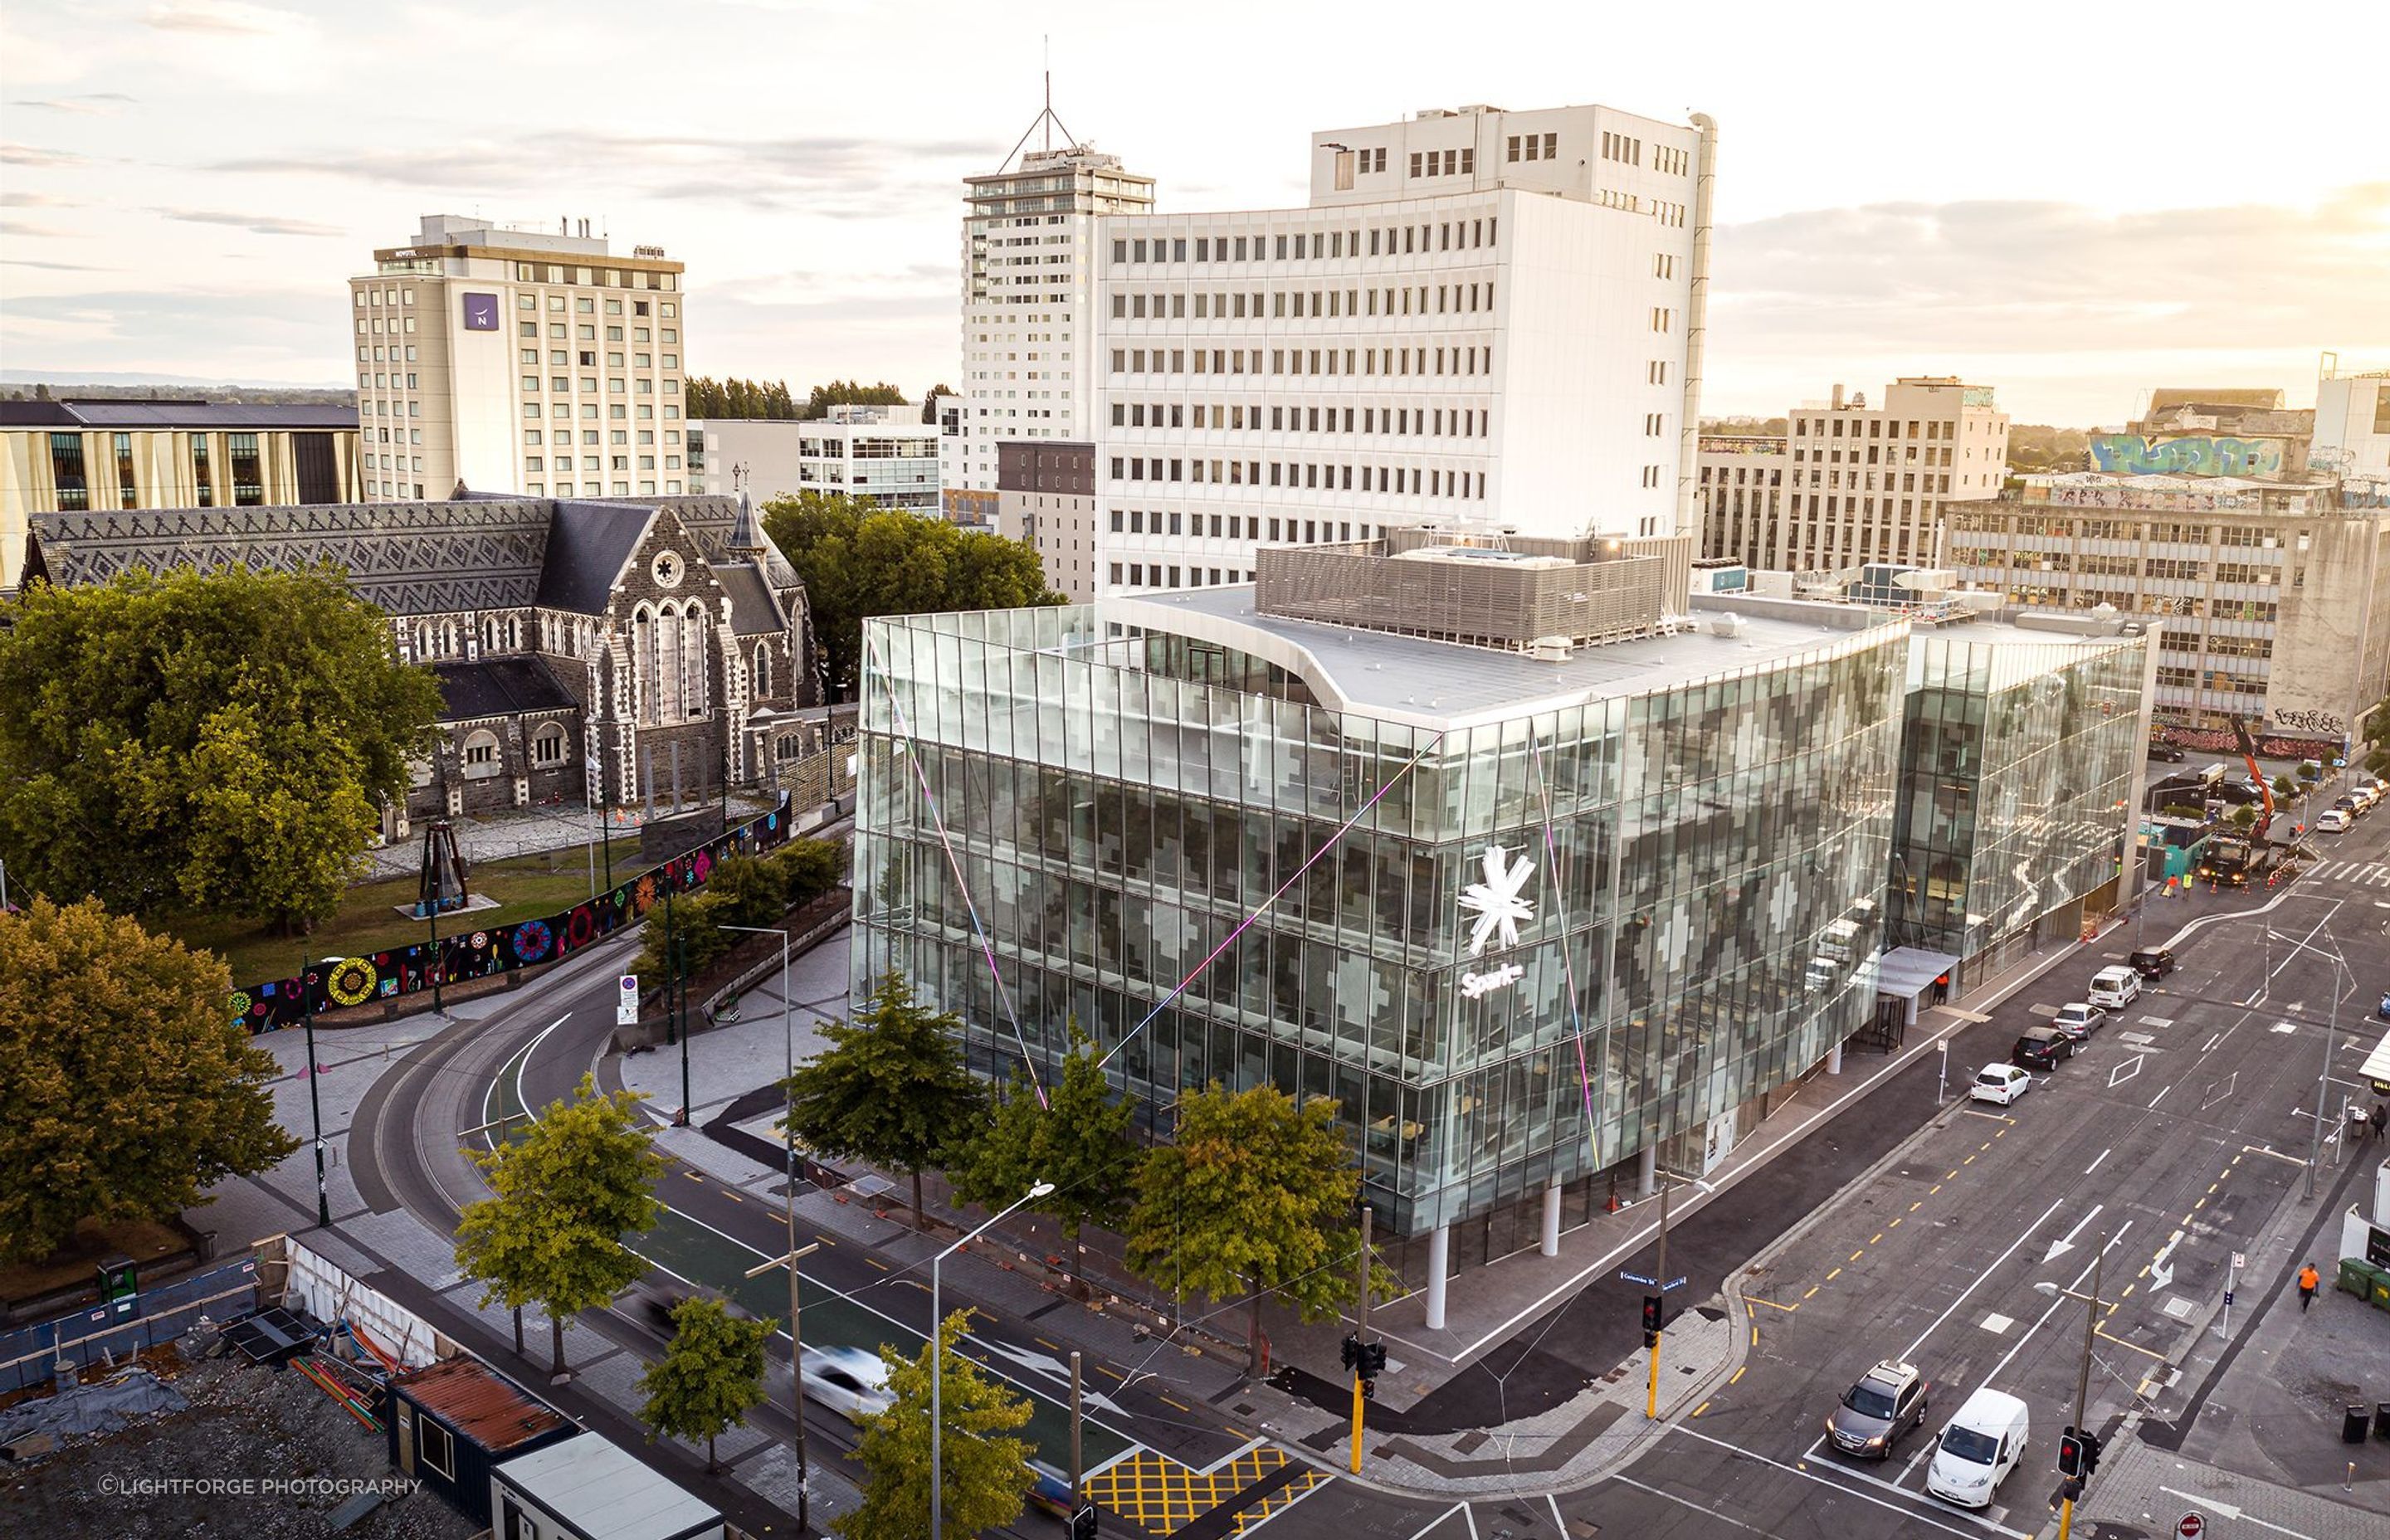 A contextual view of 2 Cathedral Square, showing the patterned glazed facade in relation to the patterned slate roof of ChristChurch Cathedral. Photograph: Dennis Radermacher/Lightforge.